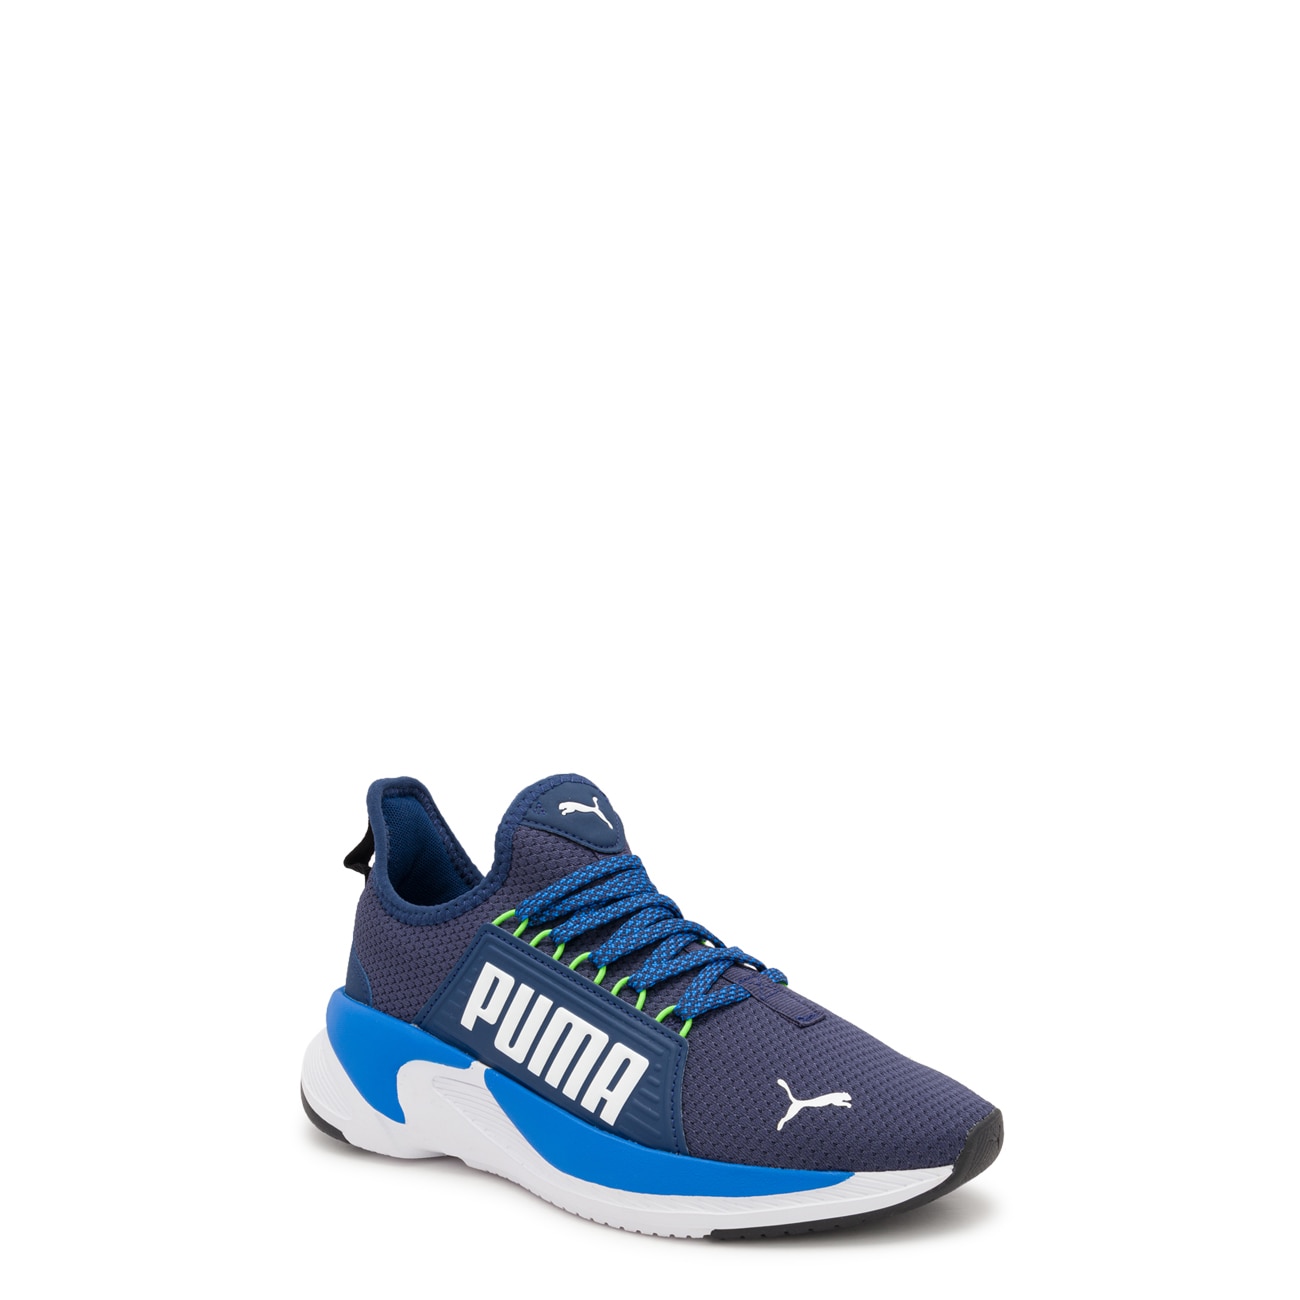 Youth Boys' Softride Premier Running Shoe